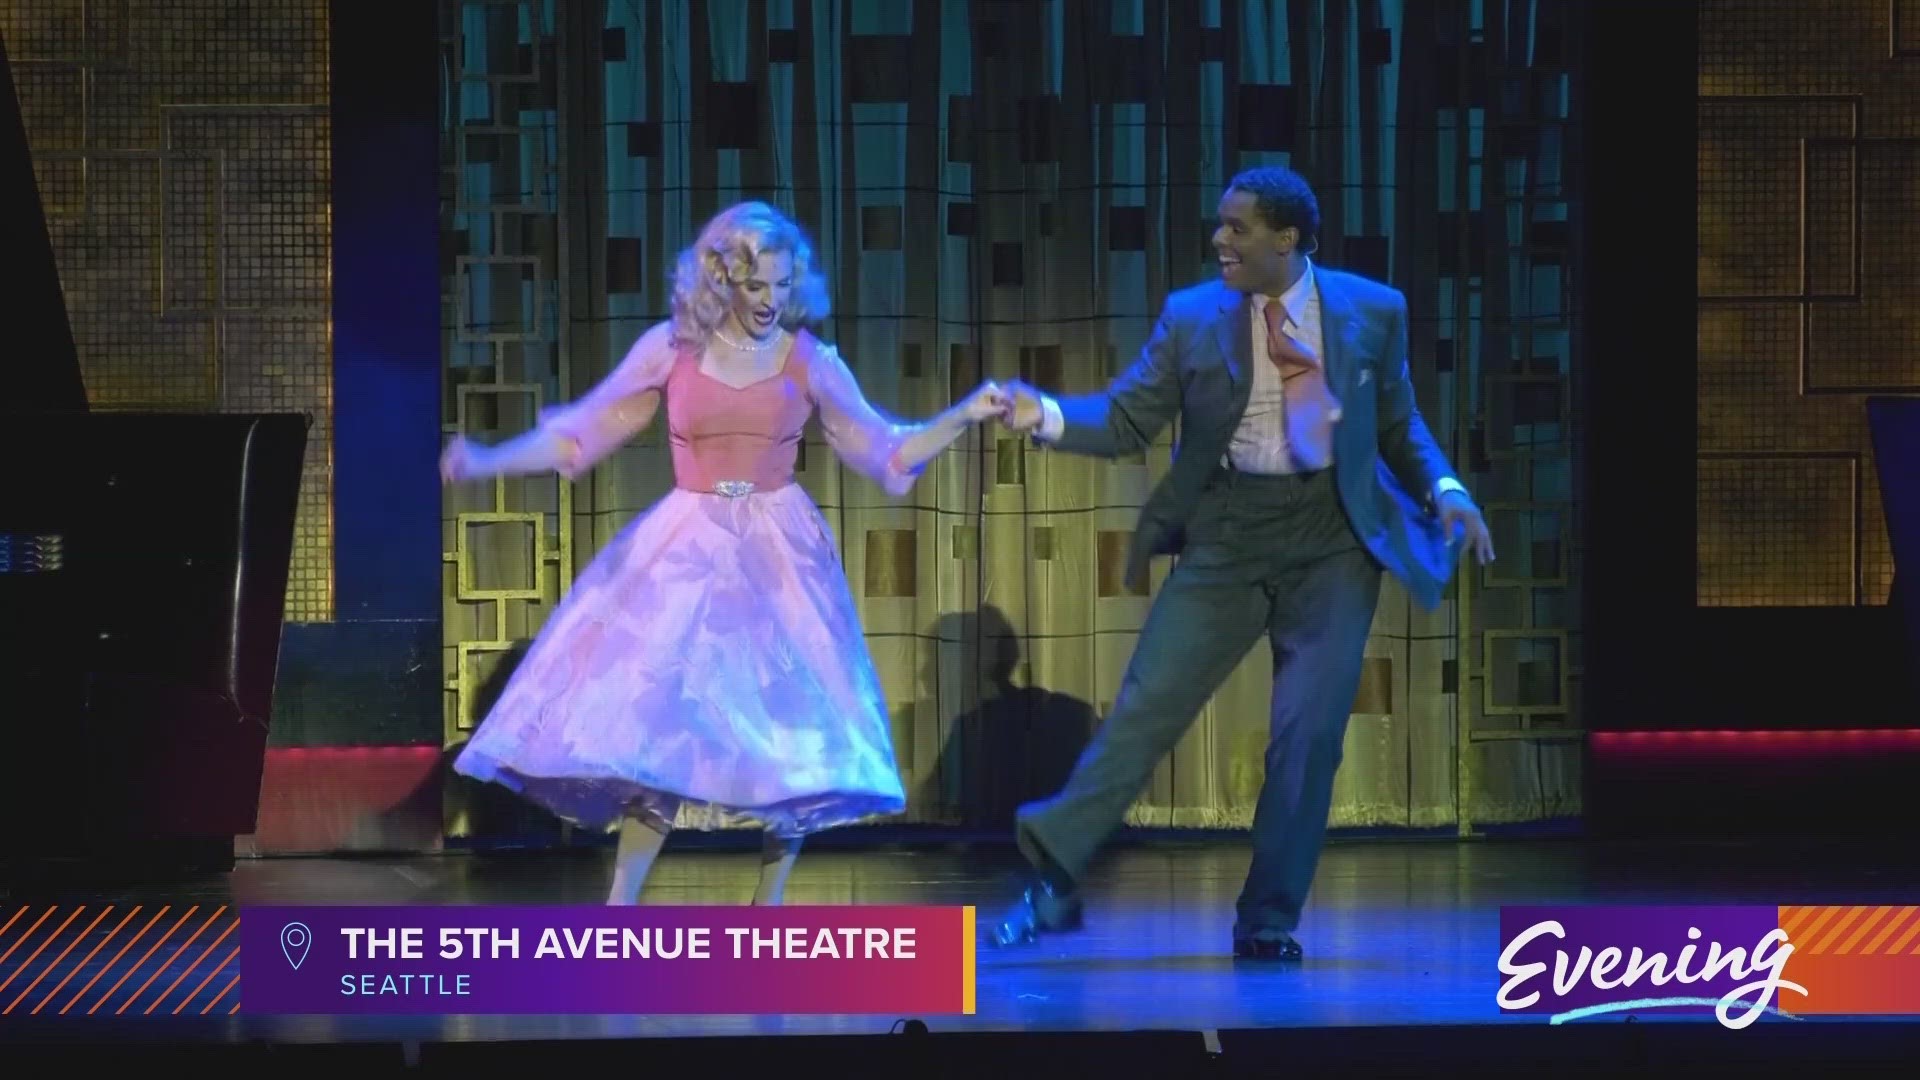 "Irving Berlin's White Christmas" features an updated script and diverse cast. #k5evening